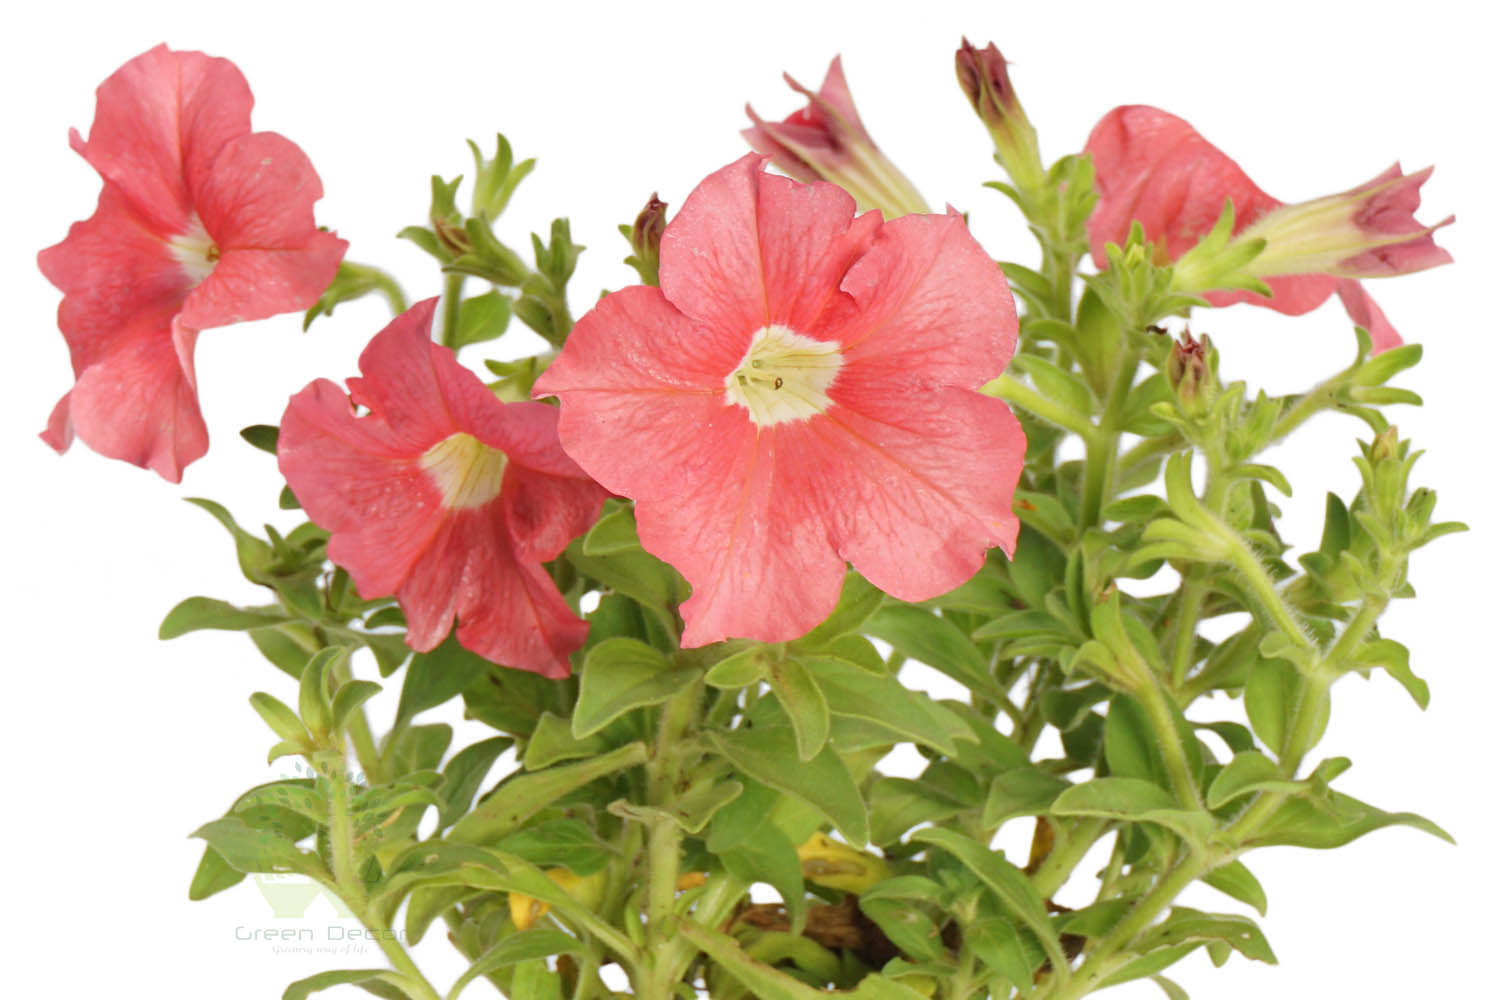 Buy Petunia Plants , White Pots and seeds in Delhi NCR by the best online nursery shop Greendecor.